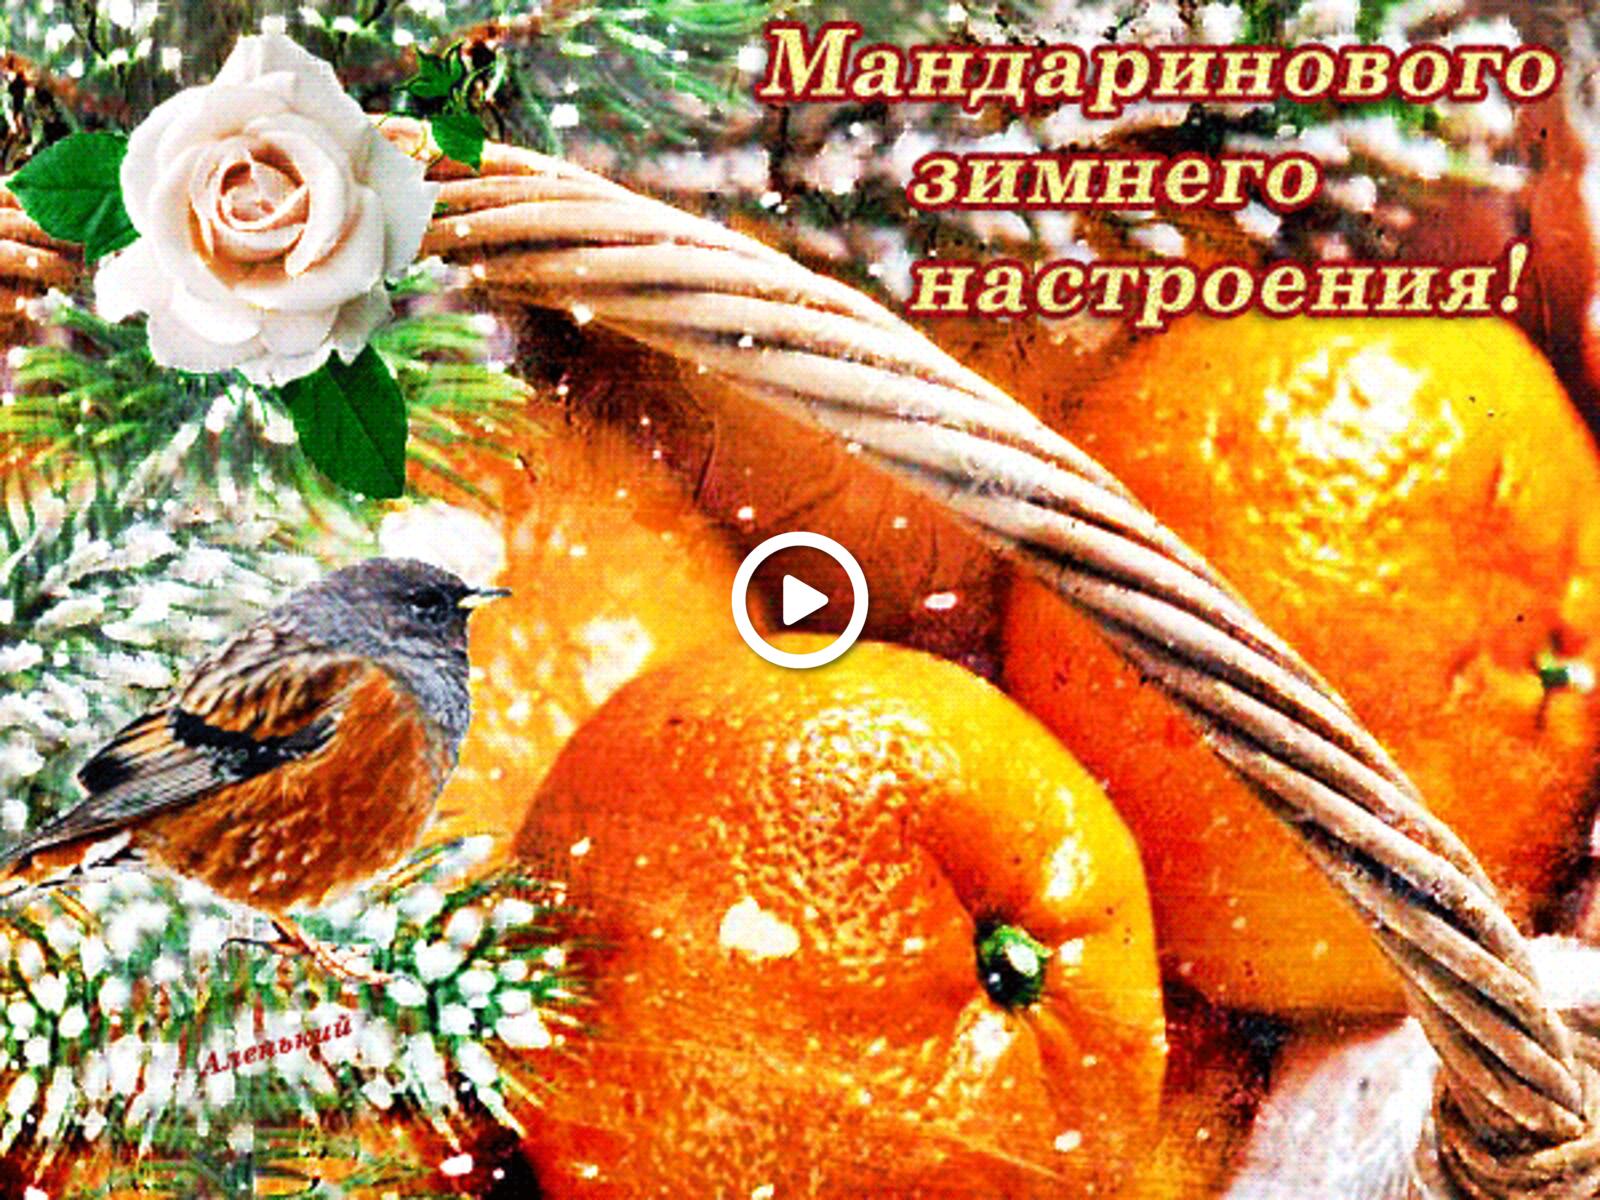 A postcard on the subject of tangerines tangerine mood animation food for free